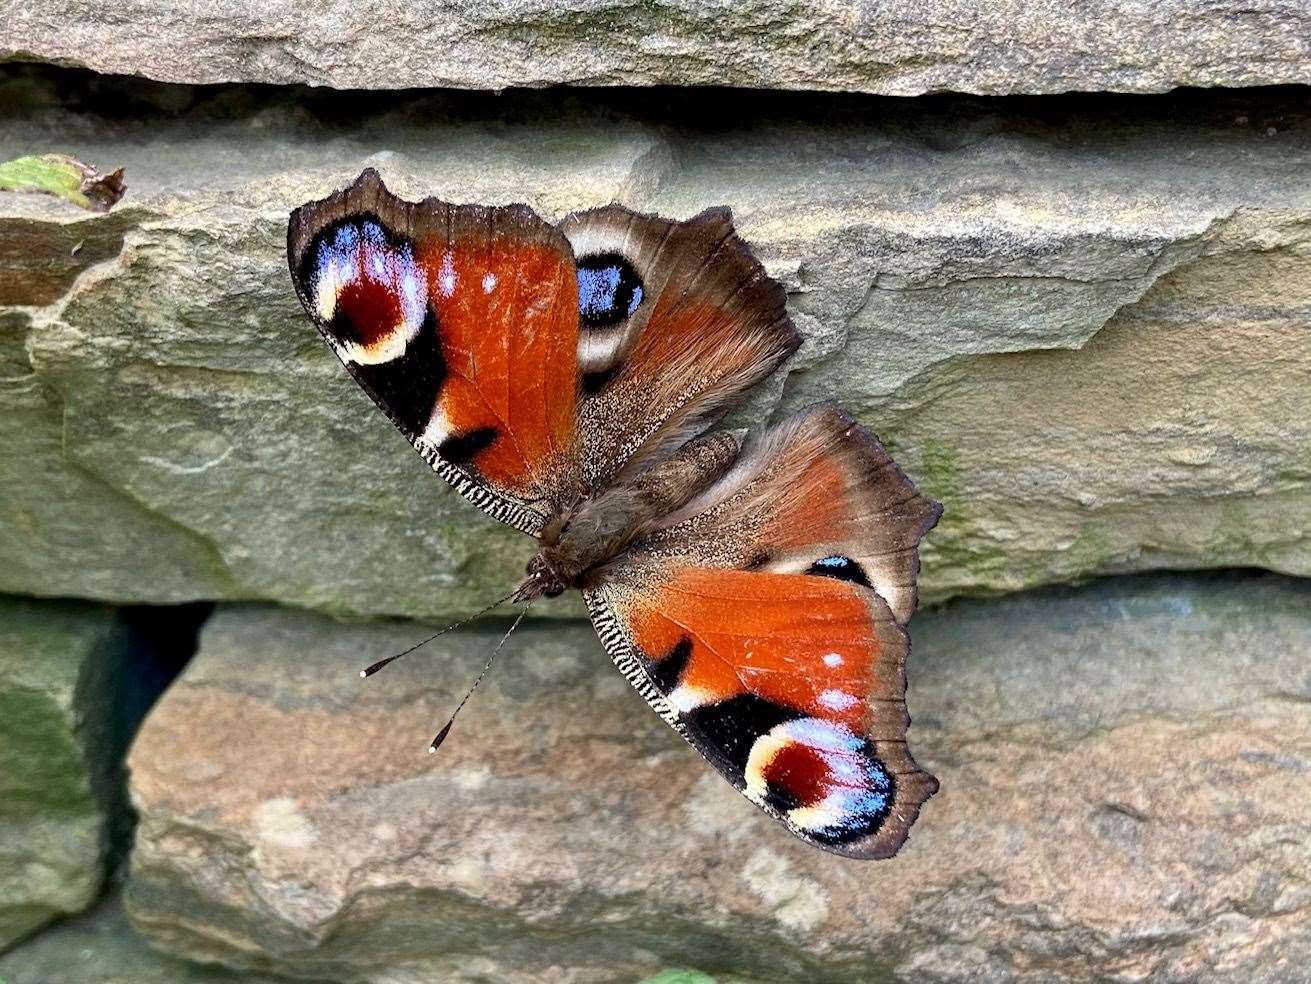 Peacock Butterfly in my garden on September 17. These often fly in over huge distances but this one’s pristine condition suggests it may have been born and bred locally.